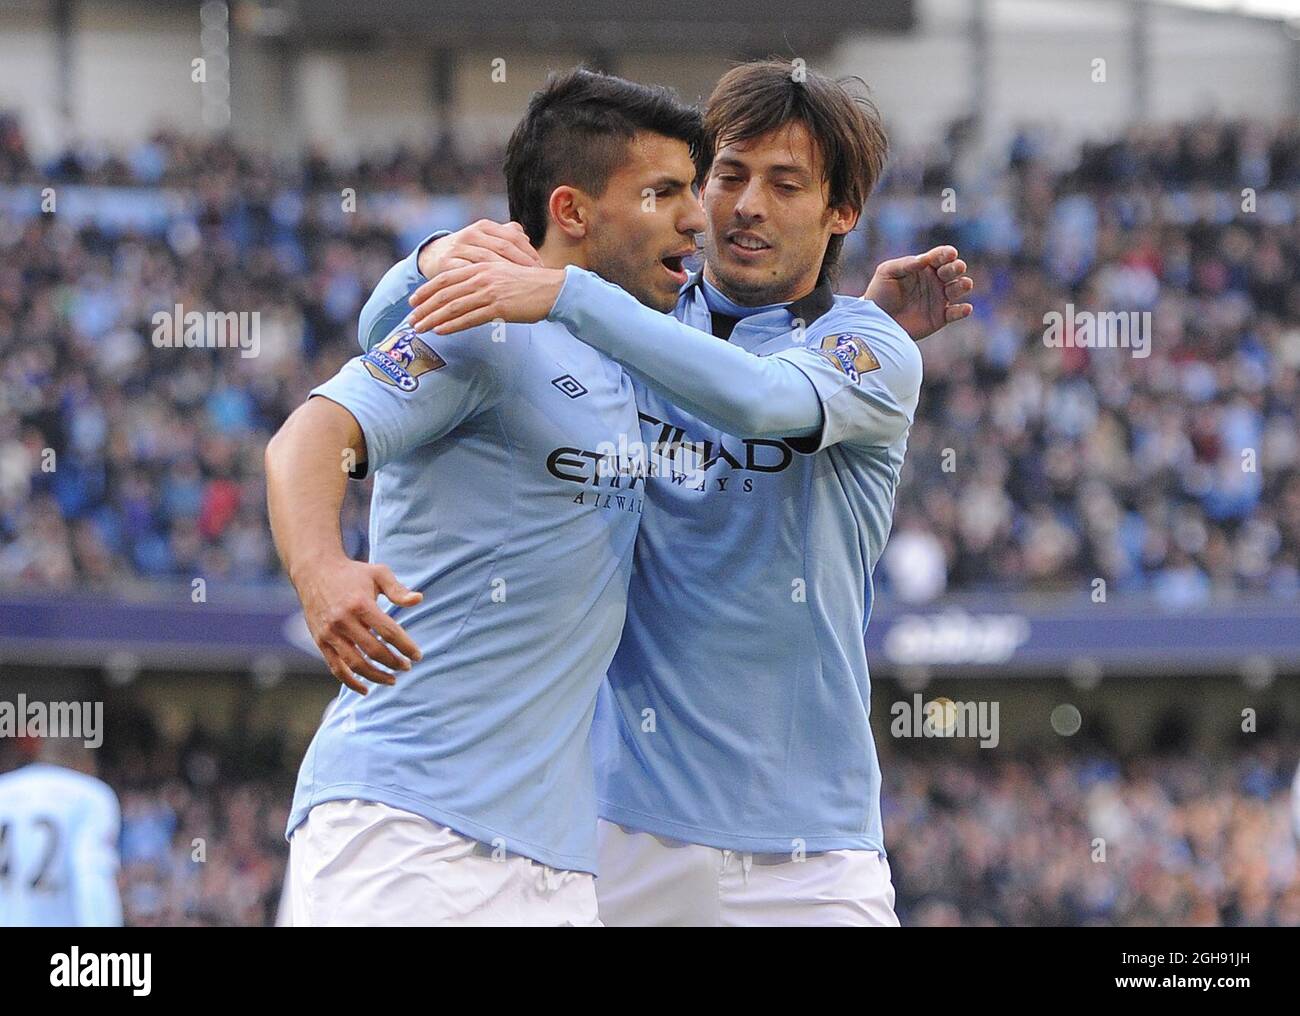 Sergio Aguero of Manchester City celebrates scoring the second goal with David Silva of Manchester City during the FA Cup, Fifth Round between Manchester City and Leeds United at the Etihad Stadium on February 17, 2013. Stock Photo